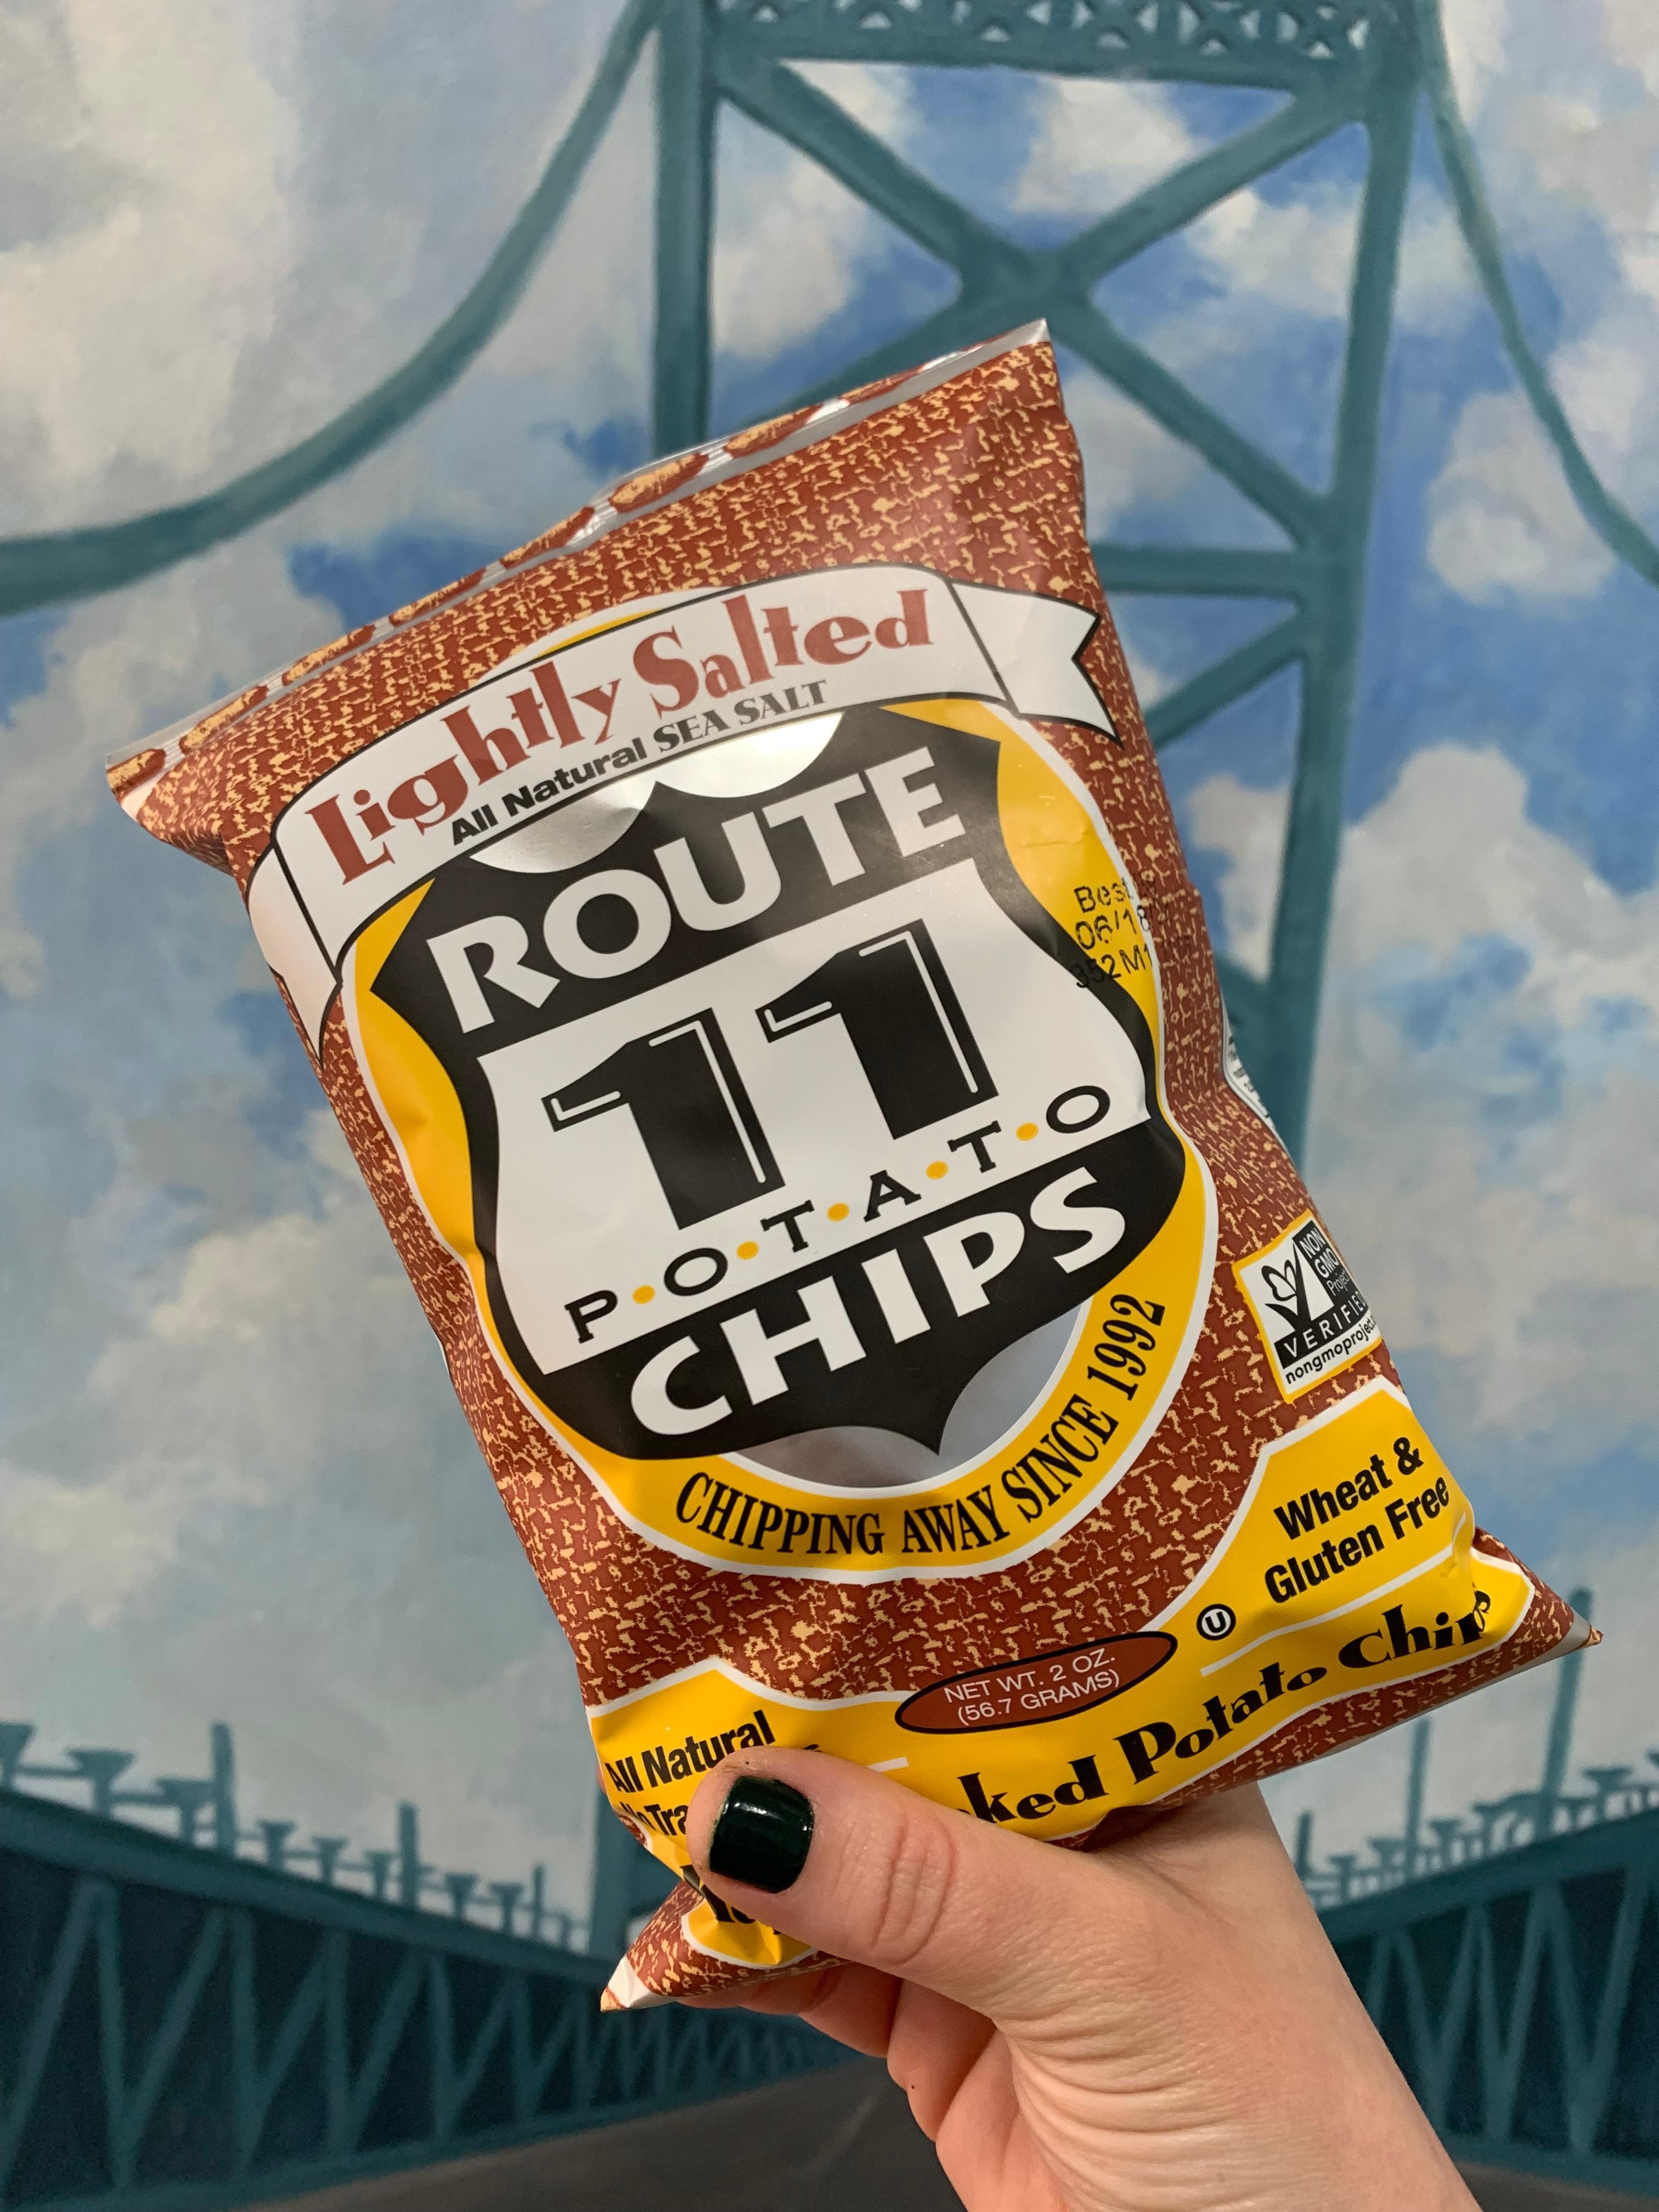 Lightly Salted Route 11 Chips